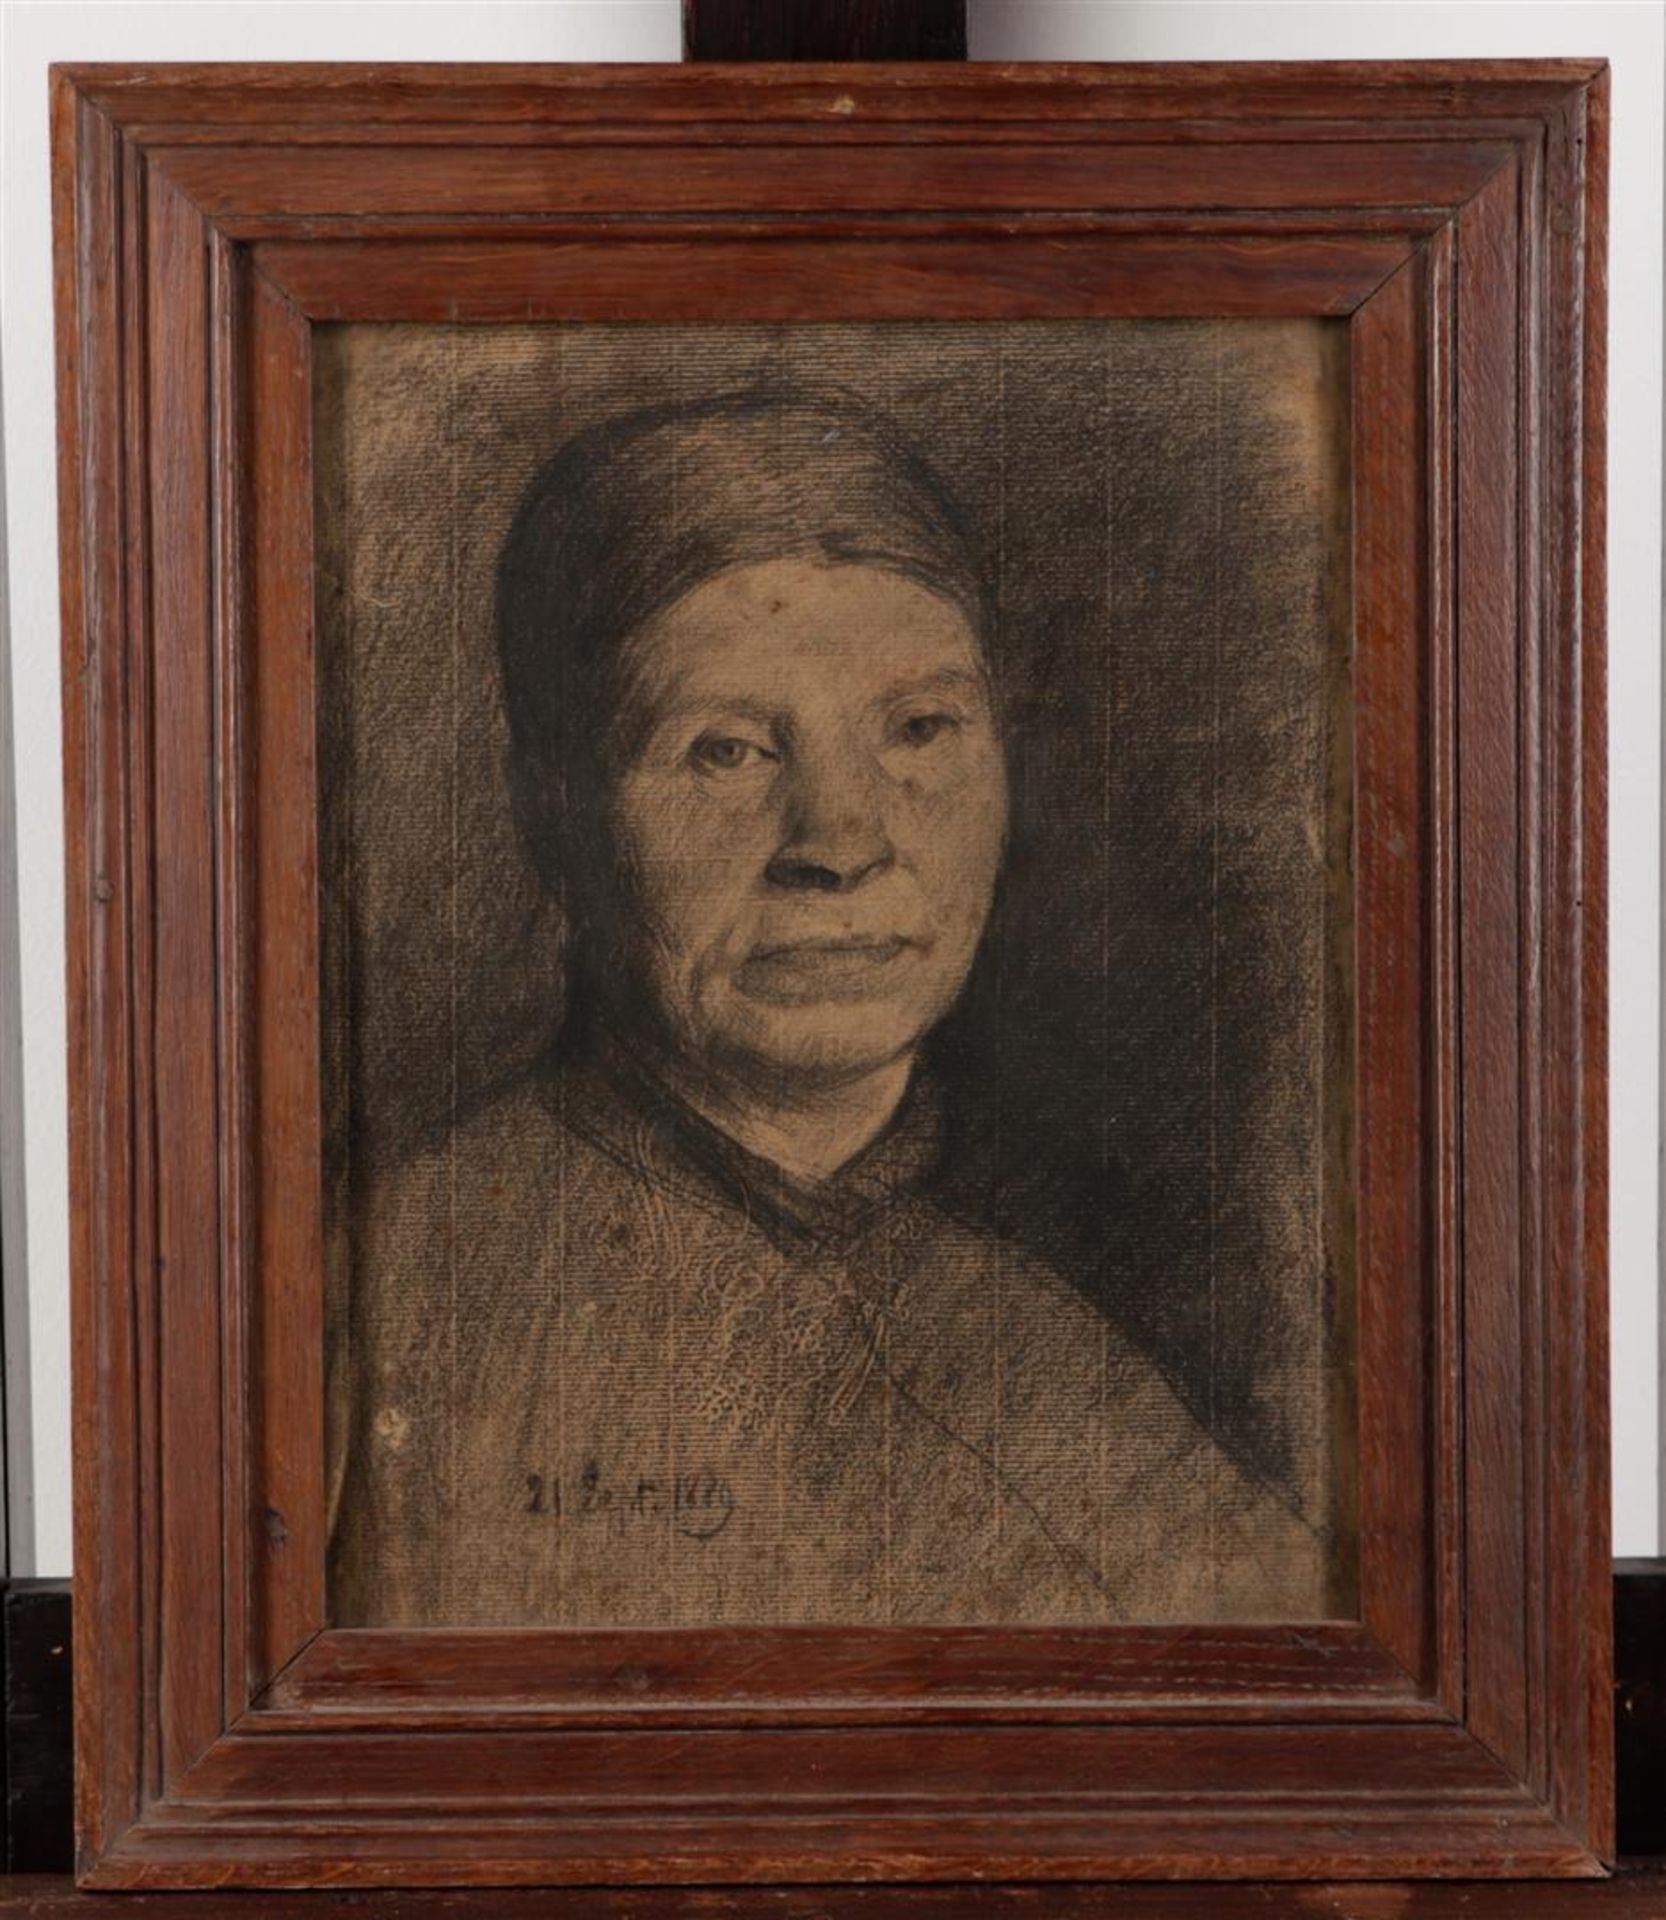 Belgian School, 19th century, Head of a peasant woman, dated '21 sept. 1889' charcoal on paper. - Bild 2 aus 3